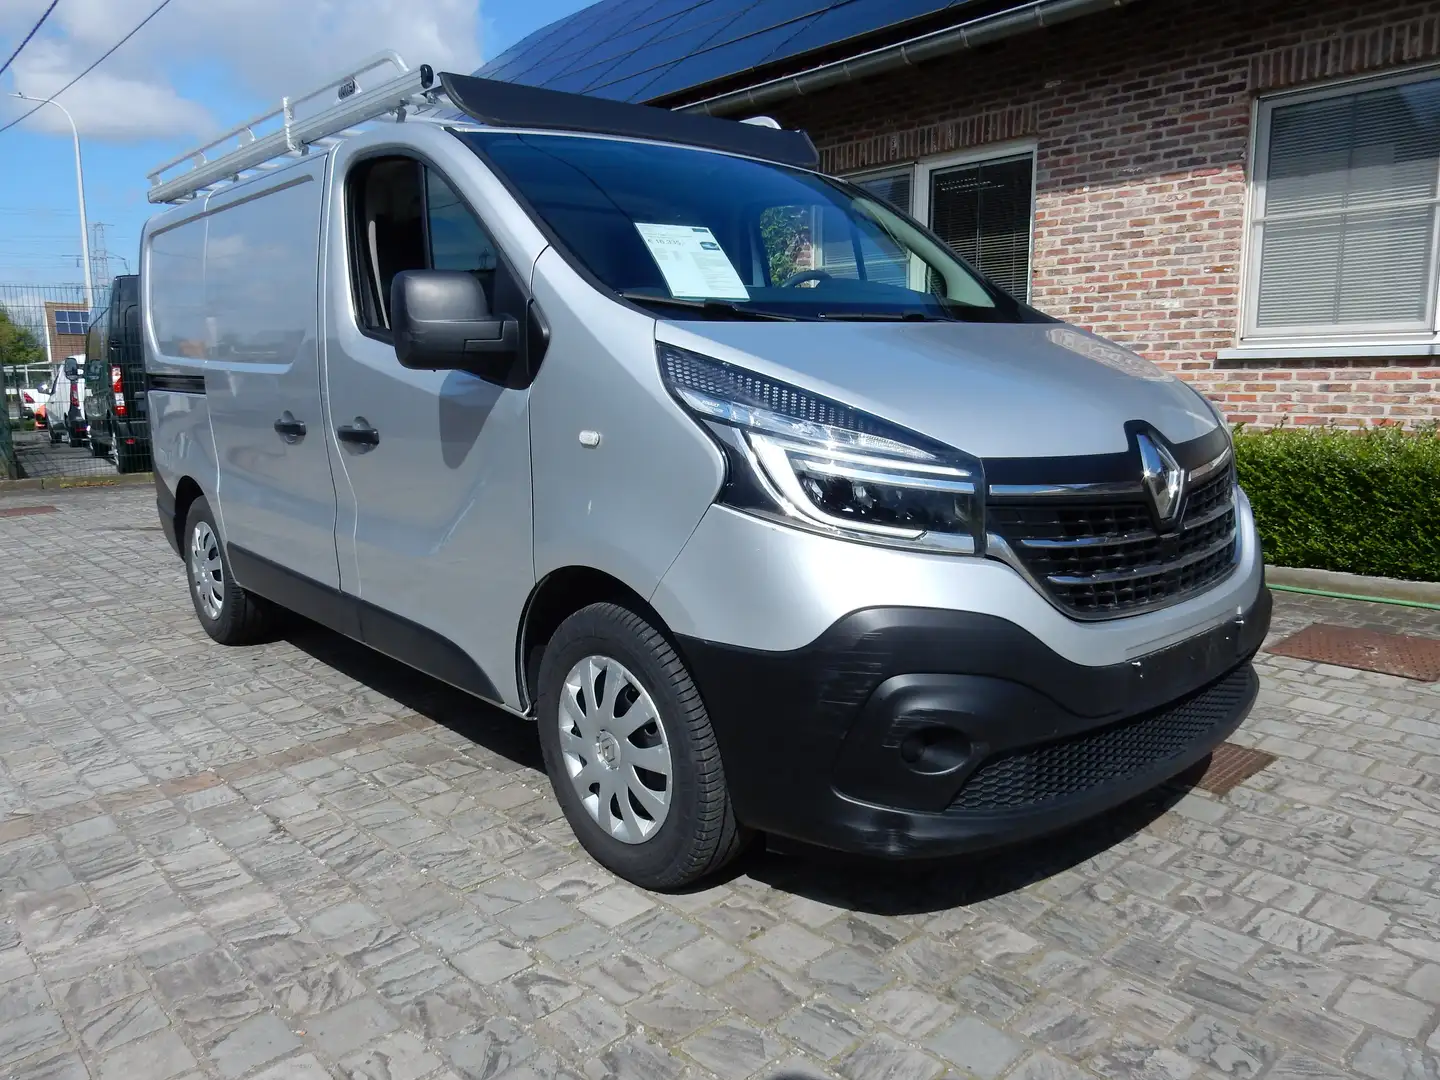 Renault Trafic 1.6dci LED bagagerek (13500Netto+Btw/Tva) Zilver - 2